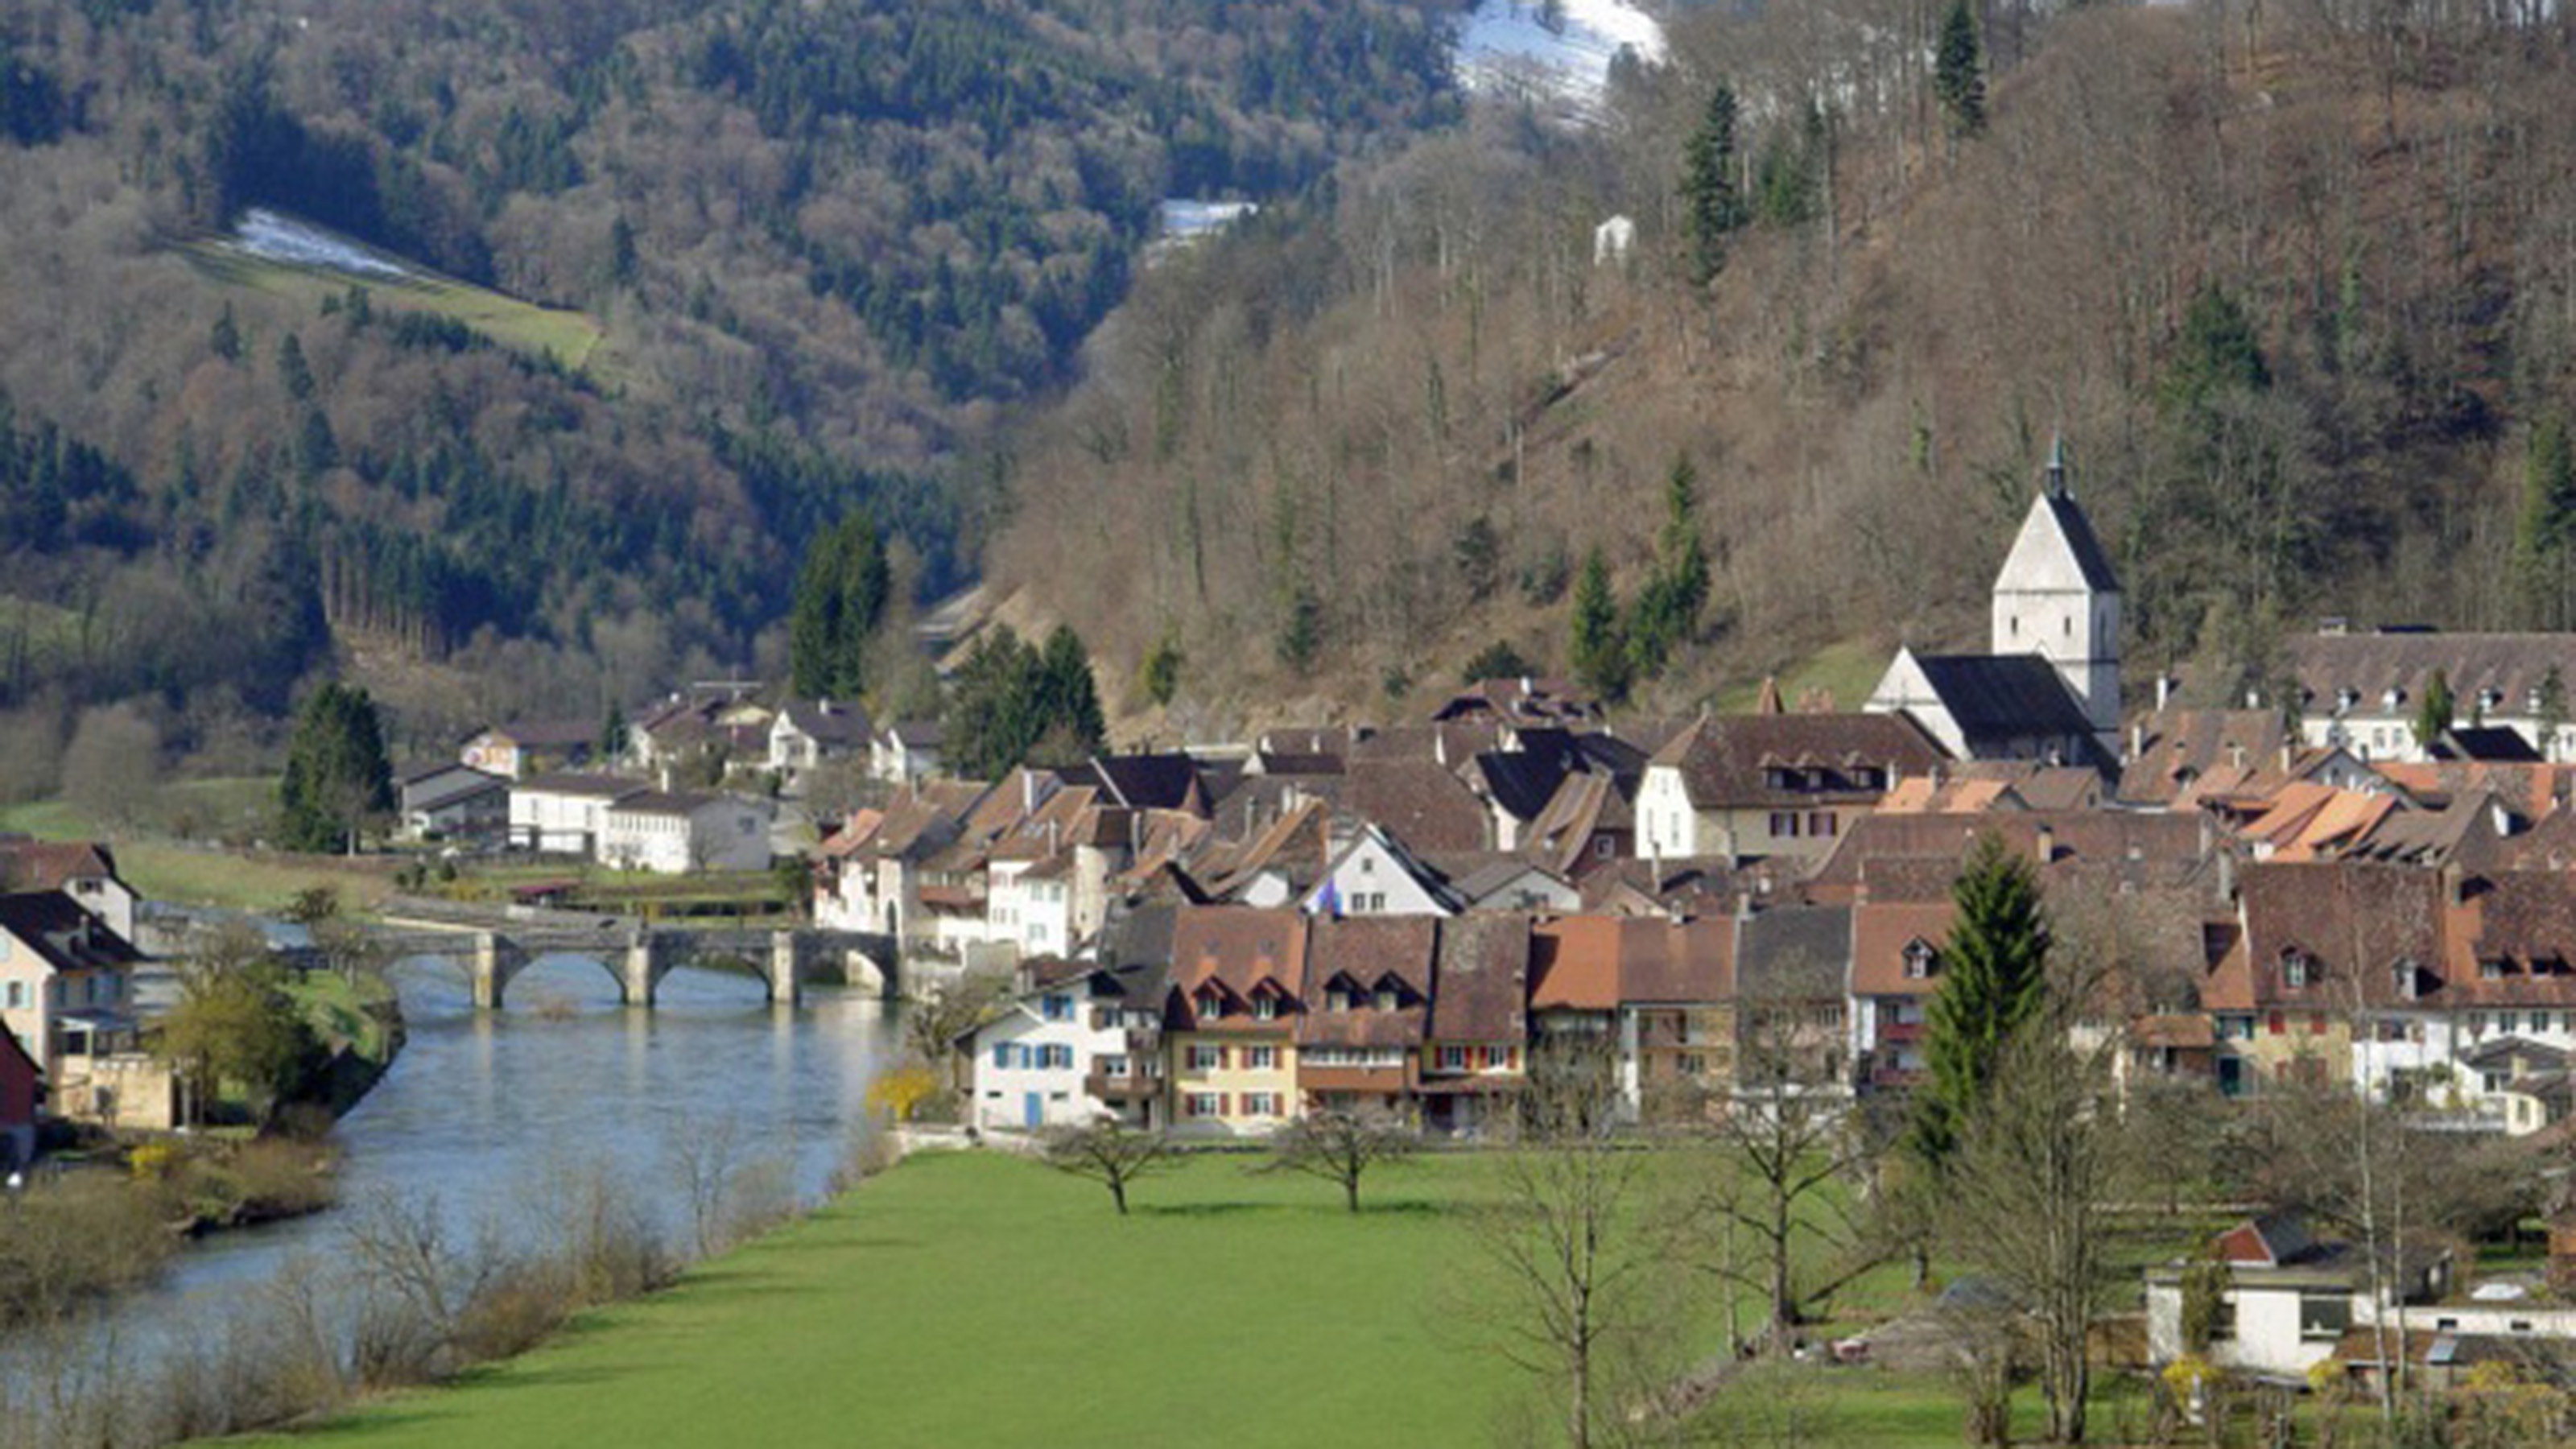 Old town of St. Ursanne from a distance, on the left the bridge over the river Doubs